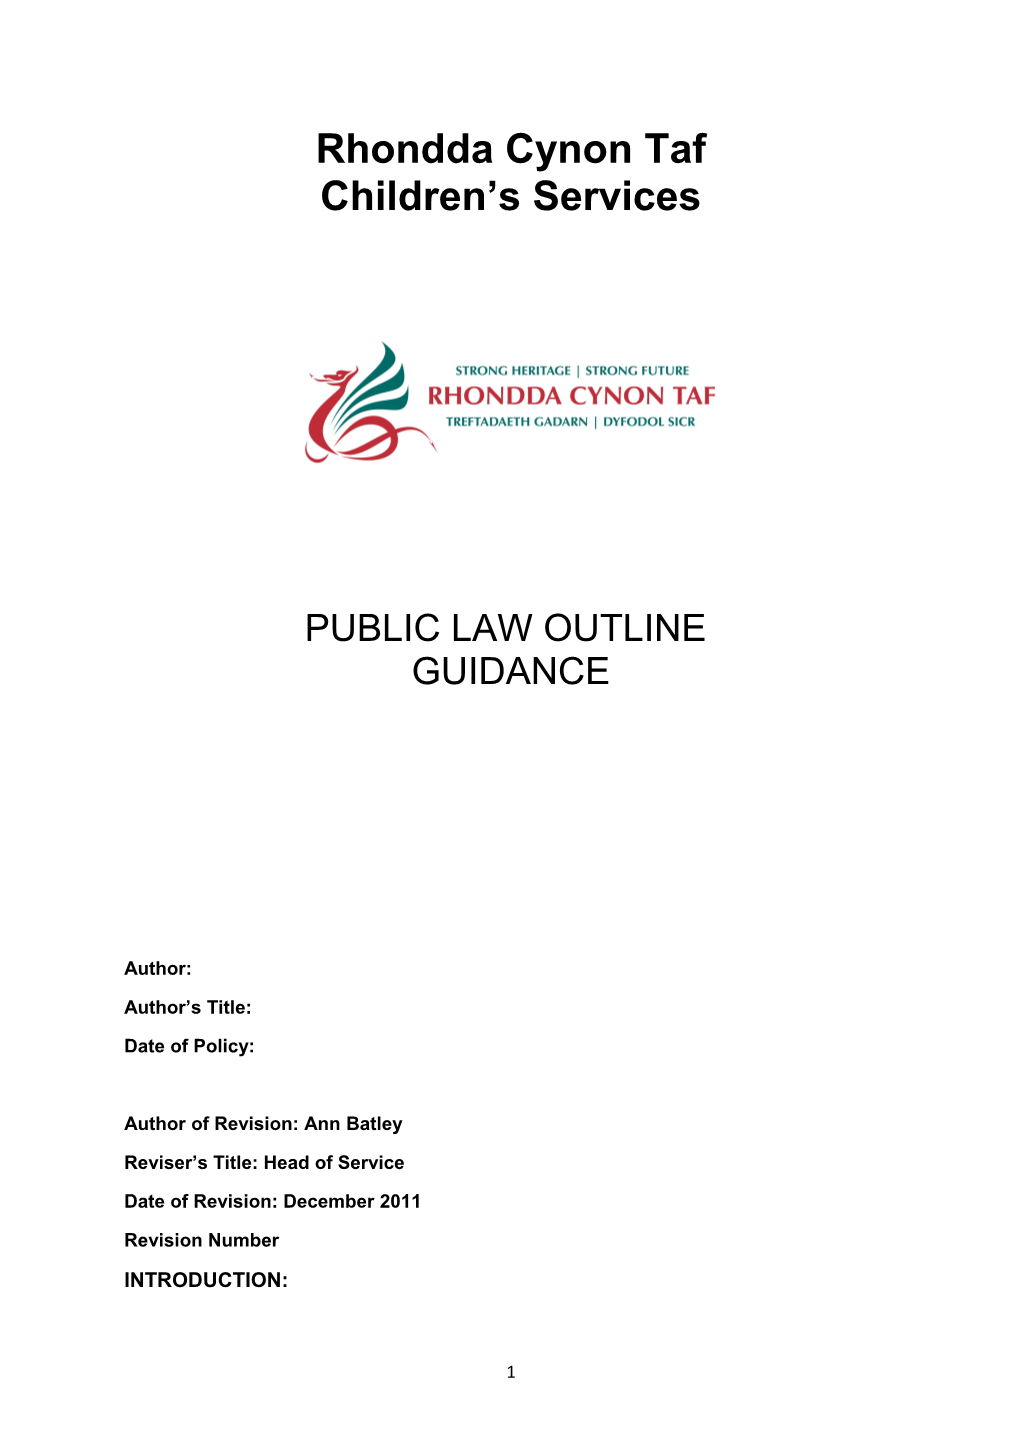 Initiating Care Procedings: Public Law Outline